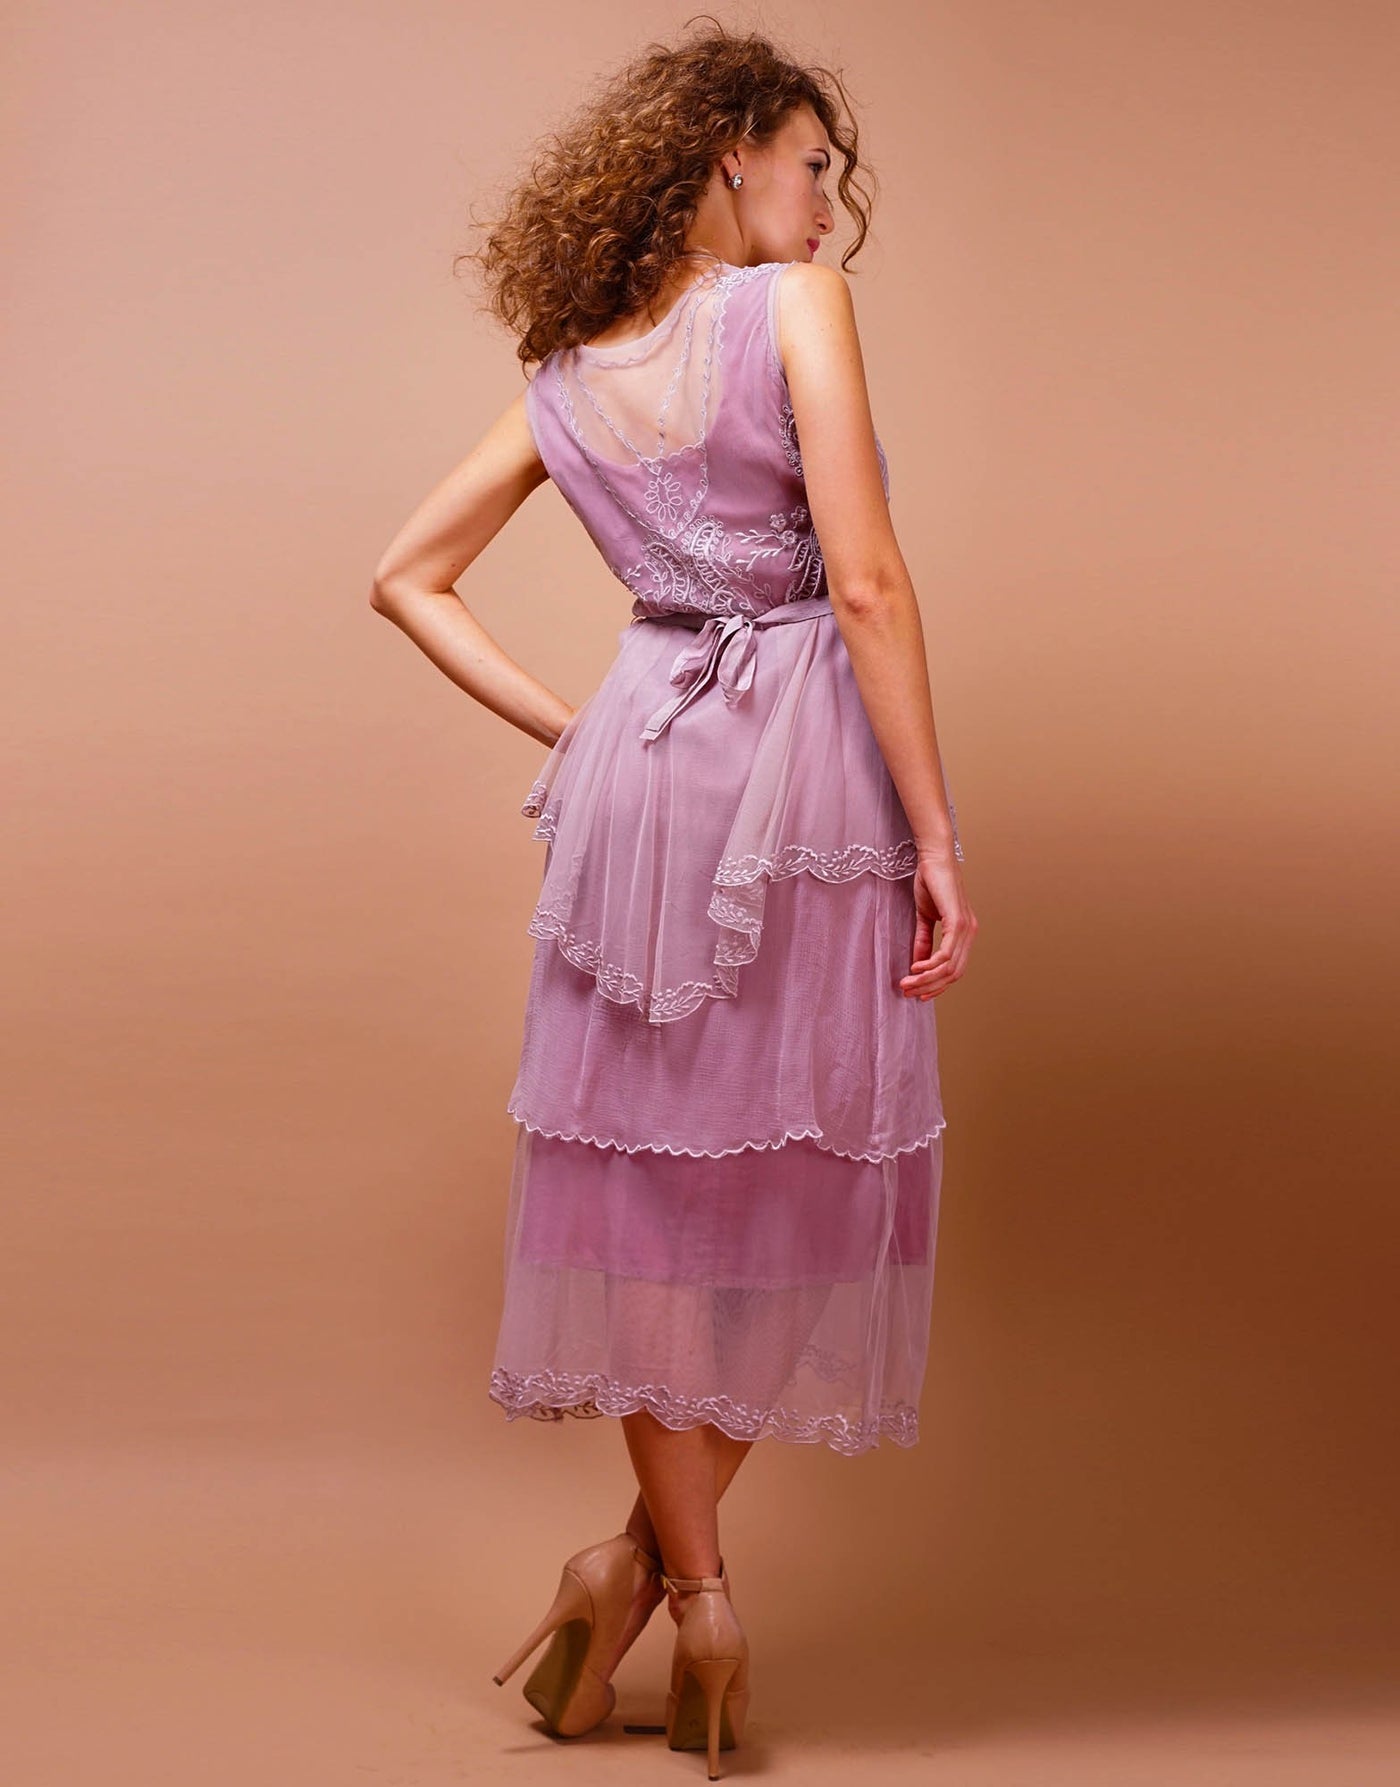 Vintage Inspired Tiered Tea Party Dress in Lavender-Rose - SOLD OUTby Nataya